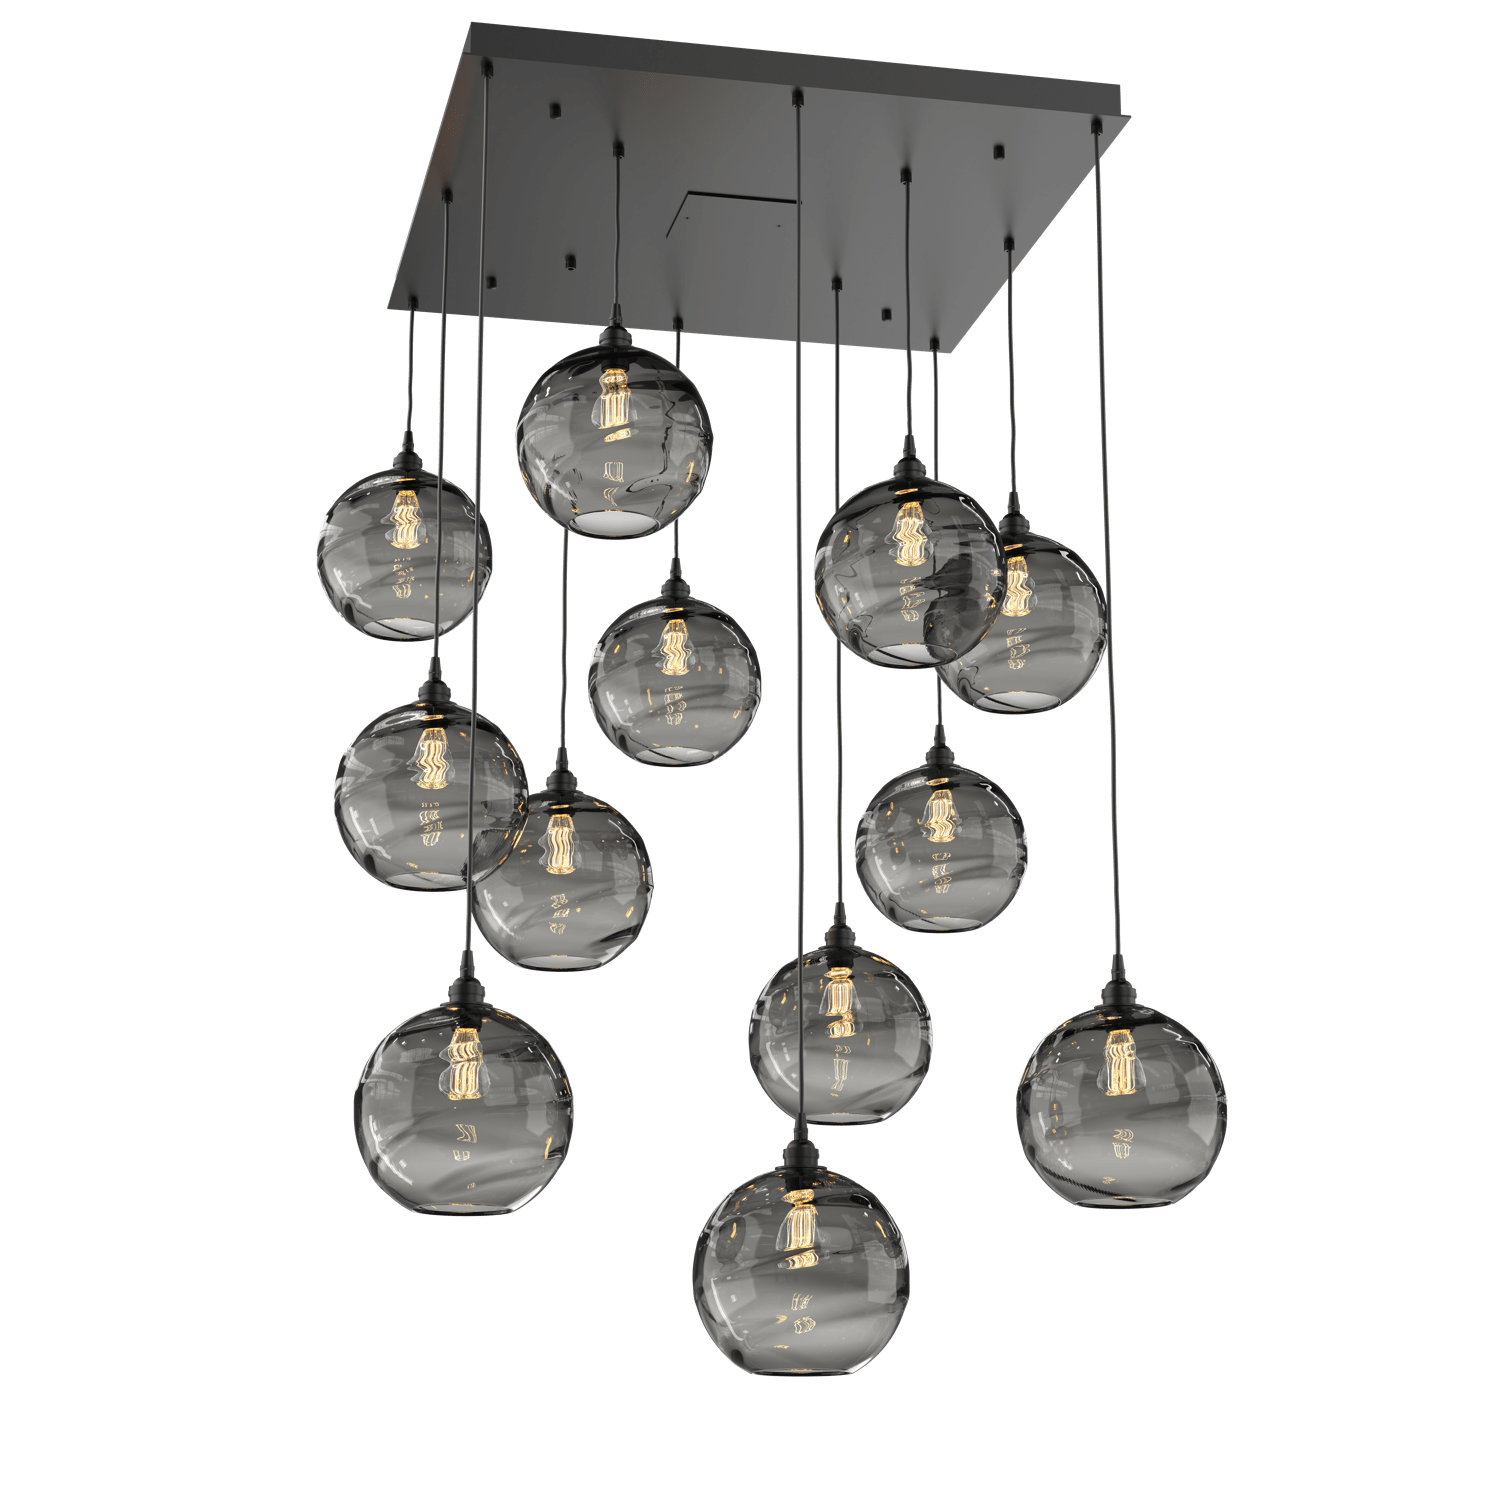 CHB0047-12-MB-OS-Hammerton-Studio-Optic-Blown-Glass-Terra-12-light-square-pendant-chandelier-with-matte-black-finish-and-optic-smoke-blown-glass-shades-and-incandescent-lamping